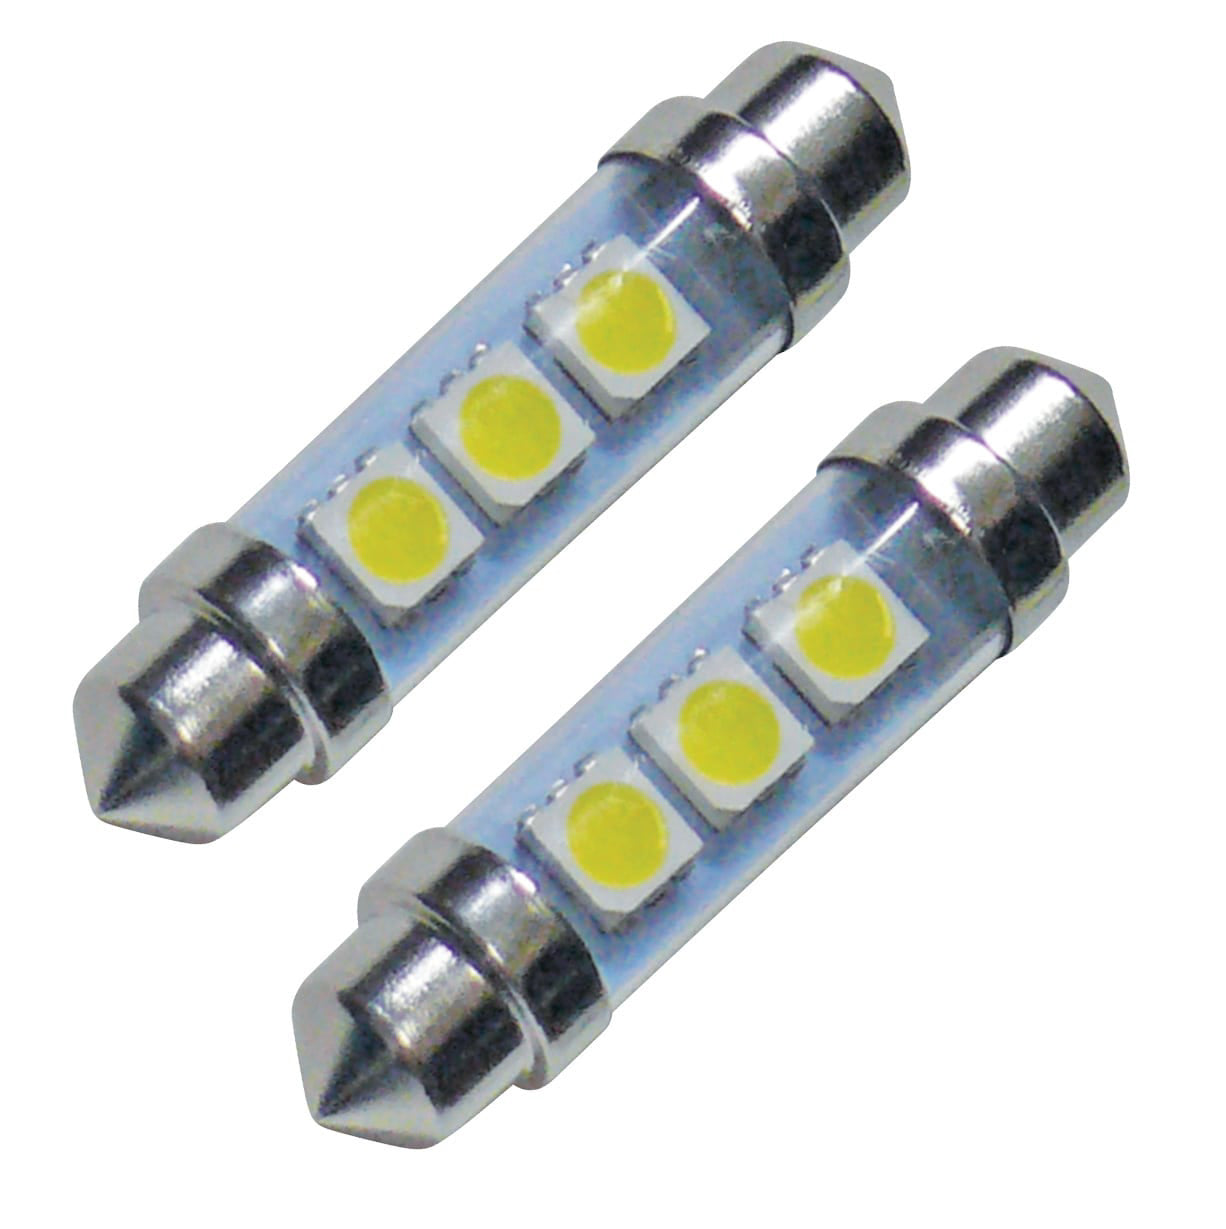 Diamond Group By Valterra Products DG72628VP Bulb Replacement LED - Fridge/Step/Decorative